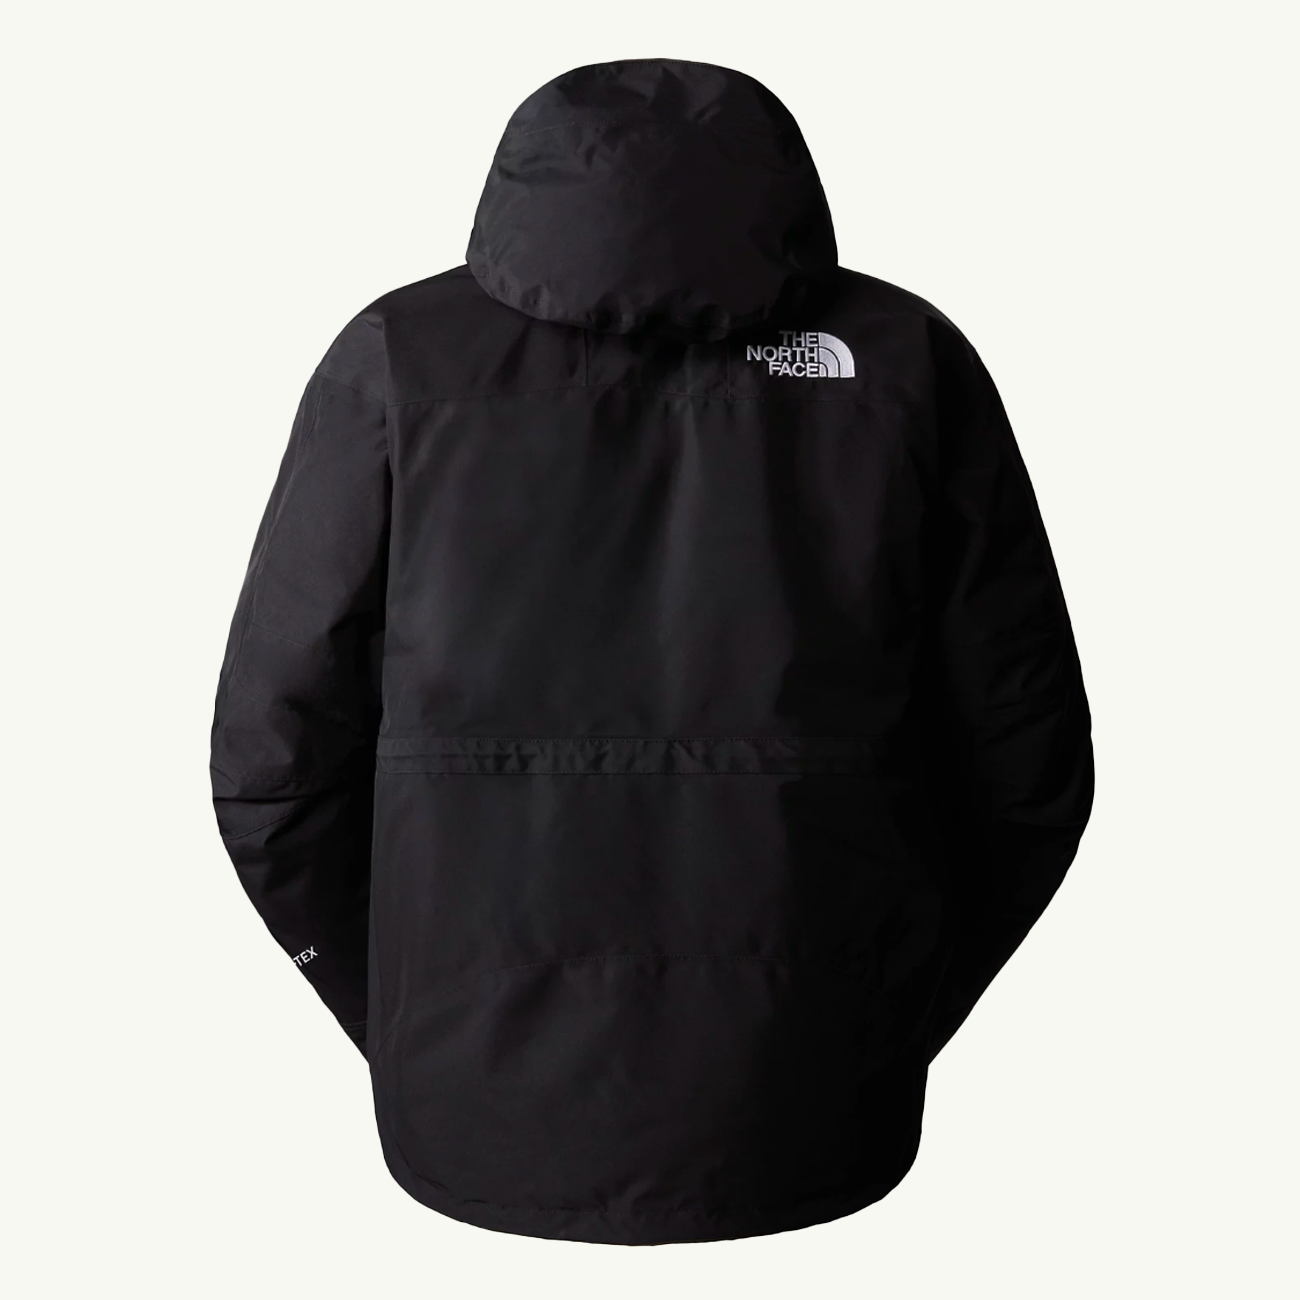 GORE-TEX Mountain Guide Insulated Jacket - TNF Black